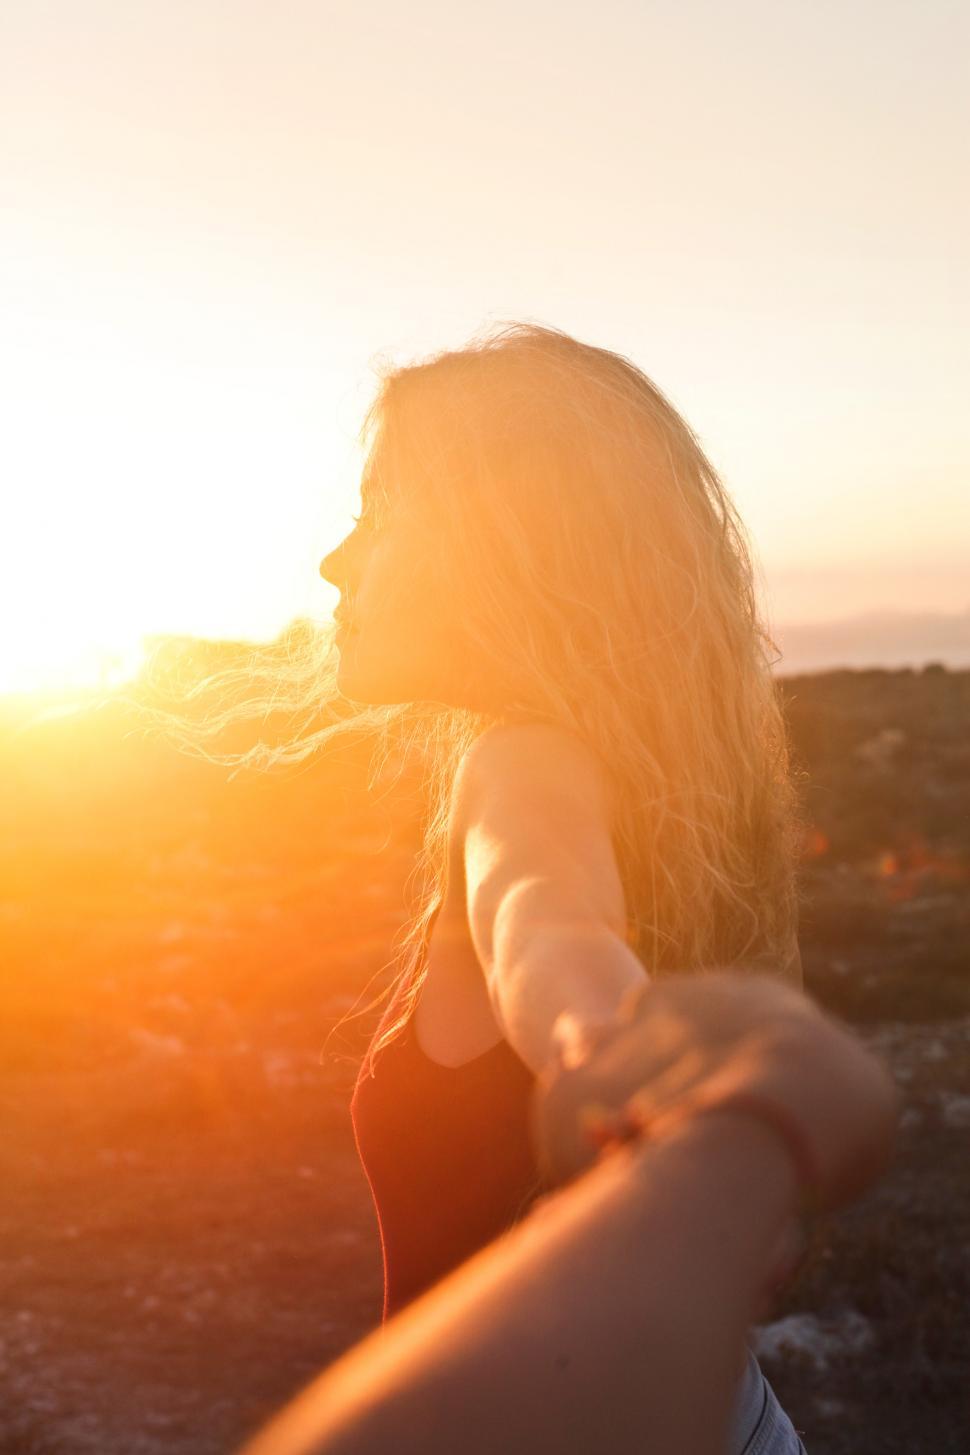 Download Free Stock Photo of A young blonde woman looking at the sunset 